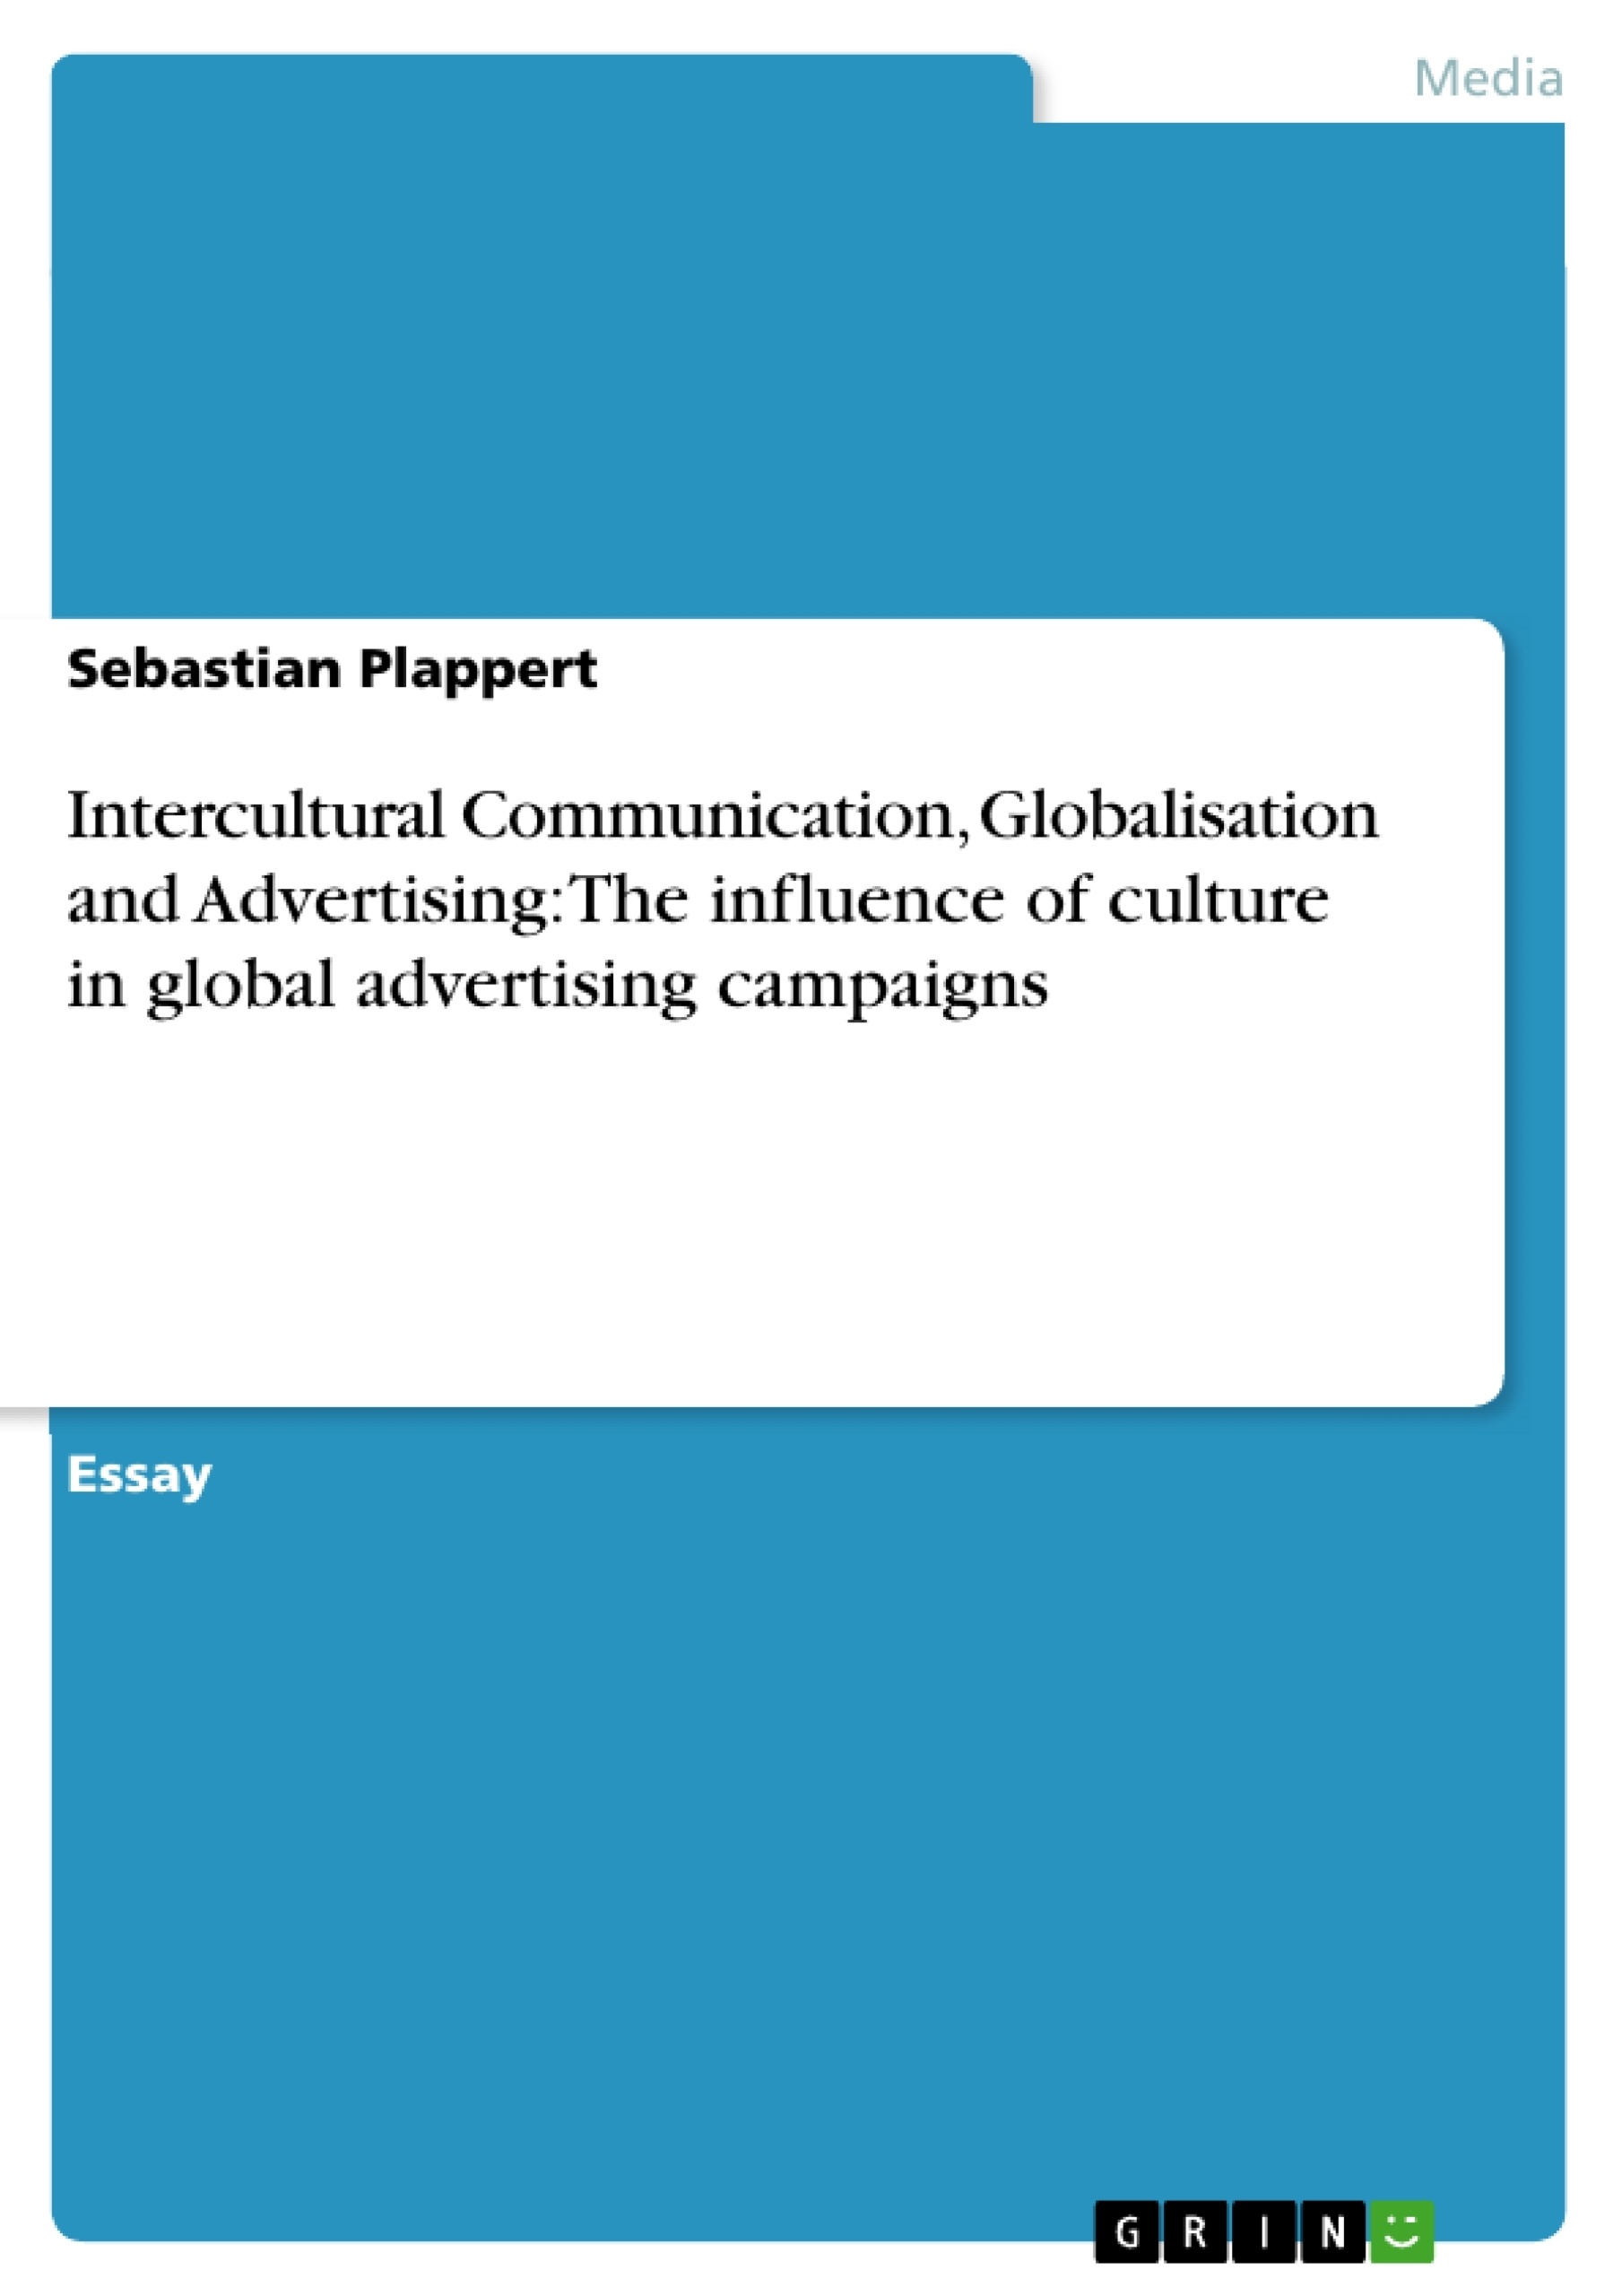 Título: Intercultural Communication, Globalisation and Advertising: The influence of culture in global advertising campaigns